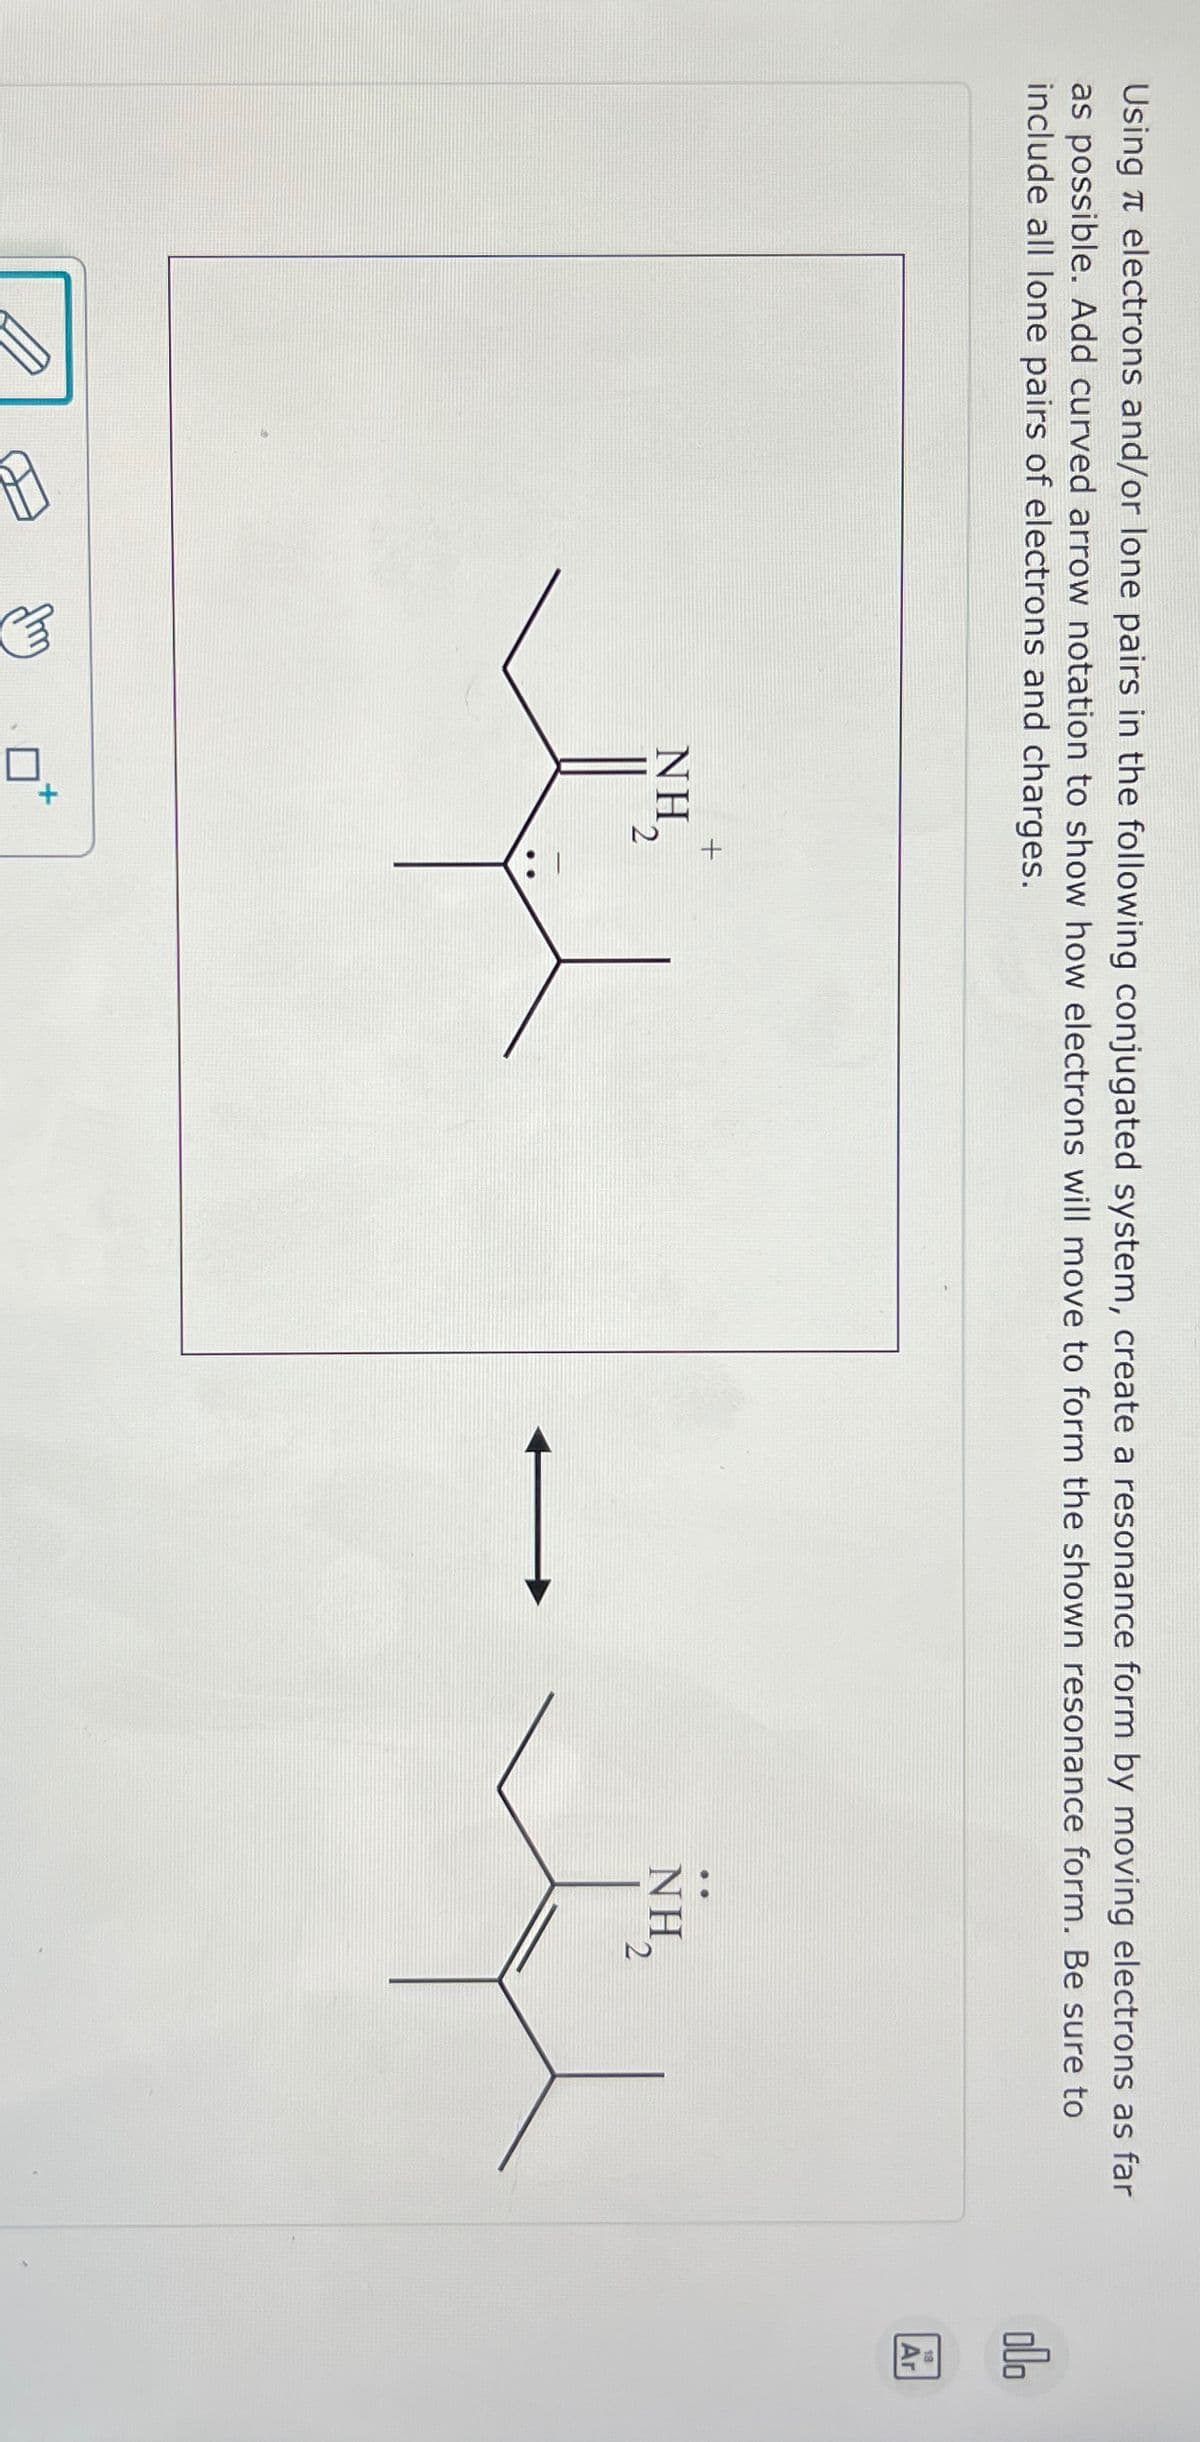 Using electrons and/or lone pairs in the following conjugated system, create a resonance form by moving electrons as far
as possible. Add curved arrow notation to show how electrons will move to form the shown resonance form. Be sure to
include all lone pairs of electrons and charges.
000
田
m
NH₂
2
+
Z:
NH₂
2
13
Ar